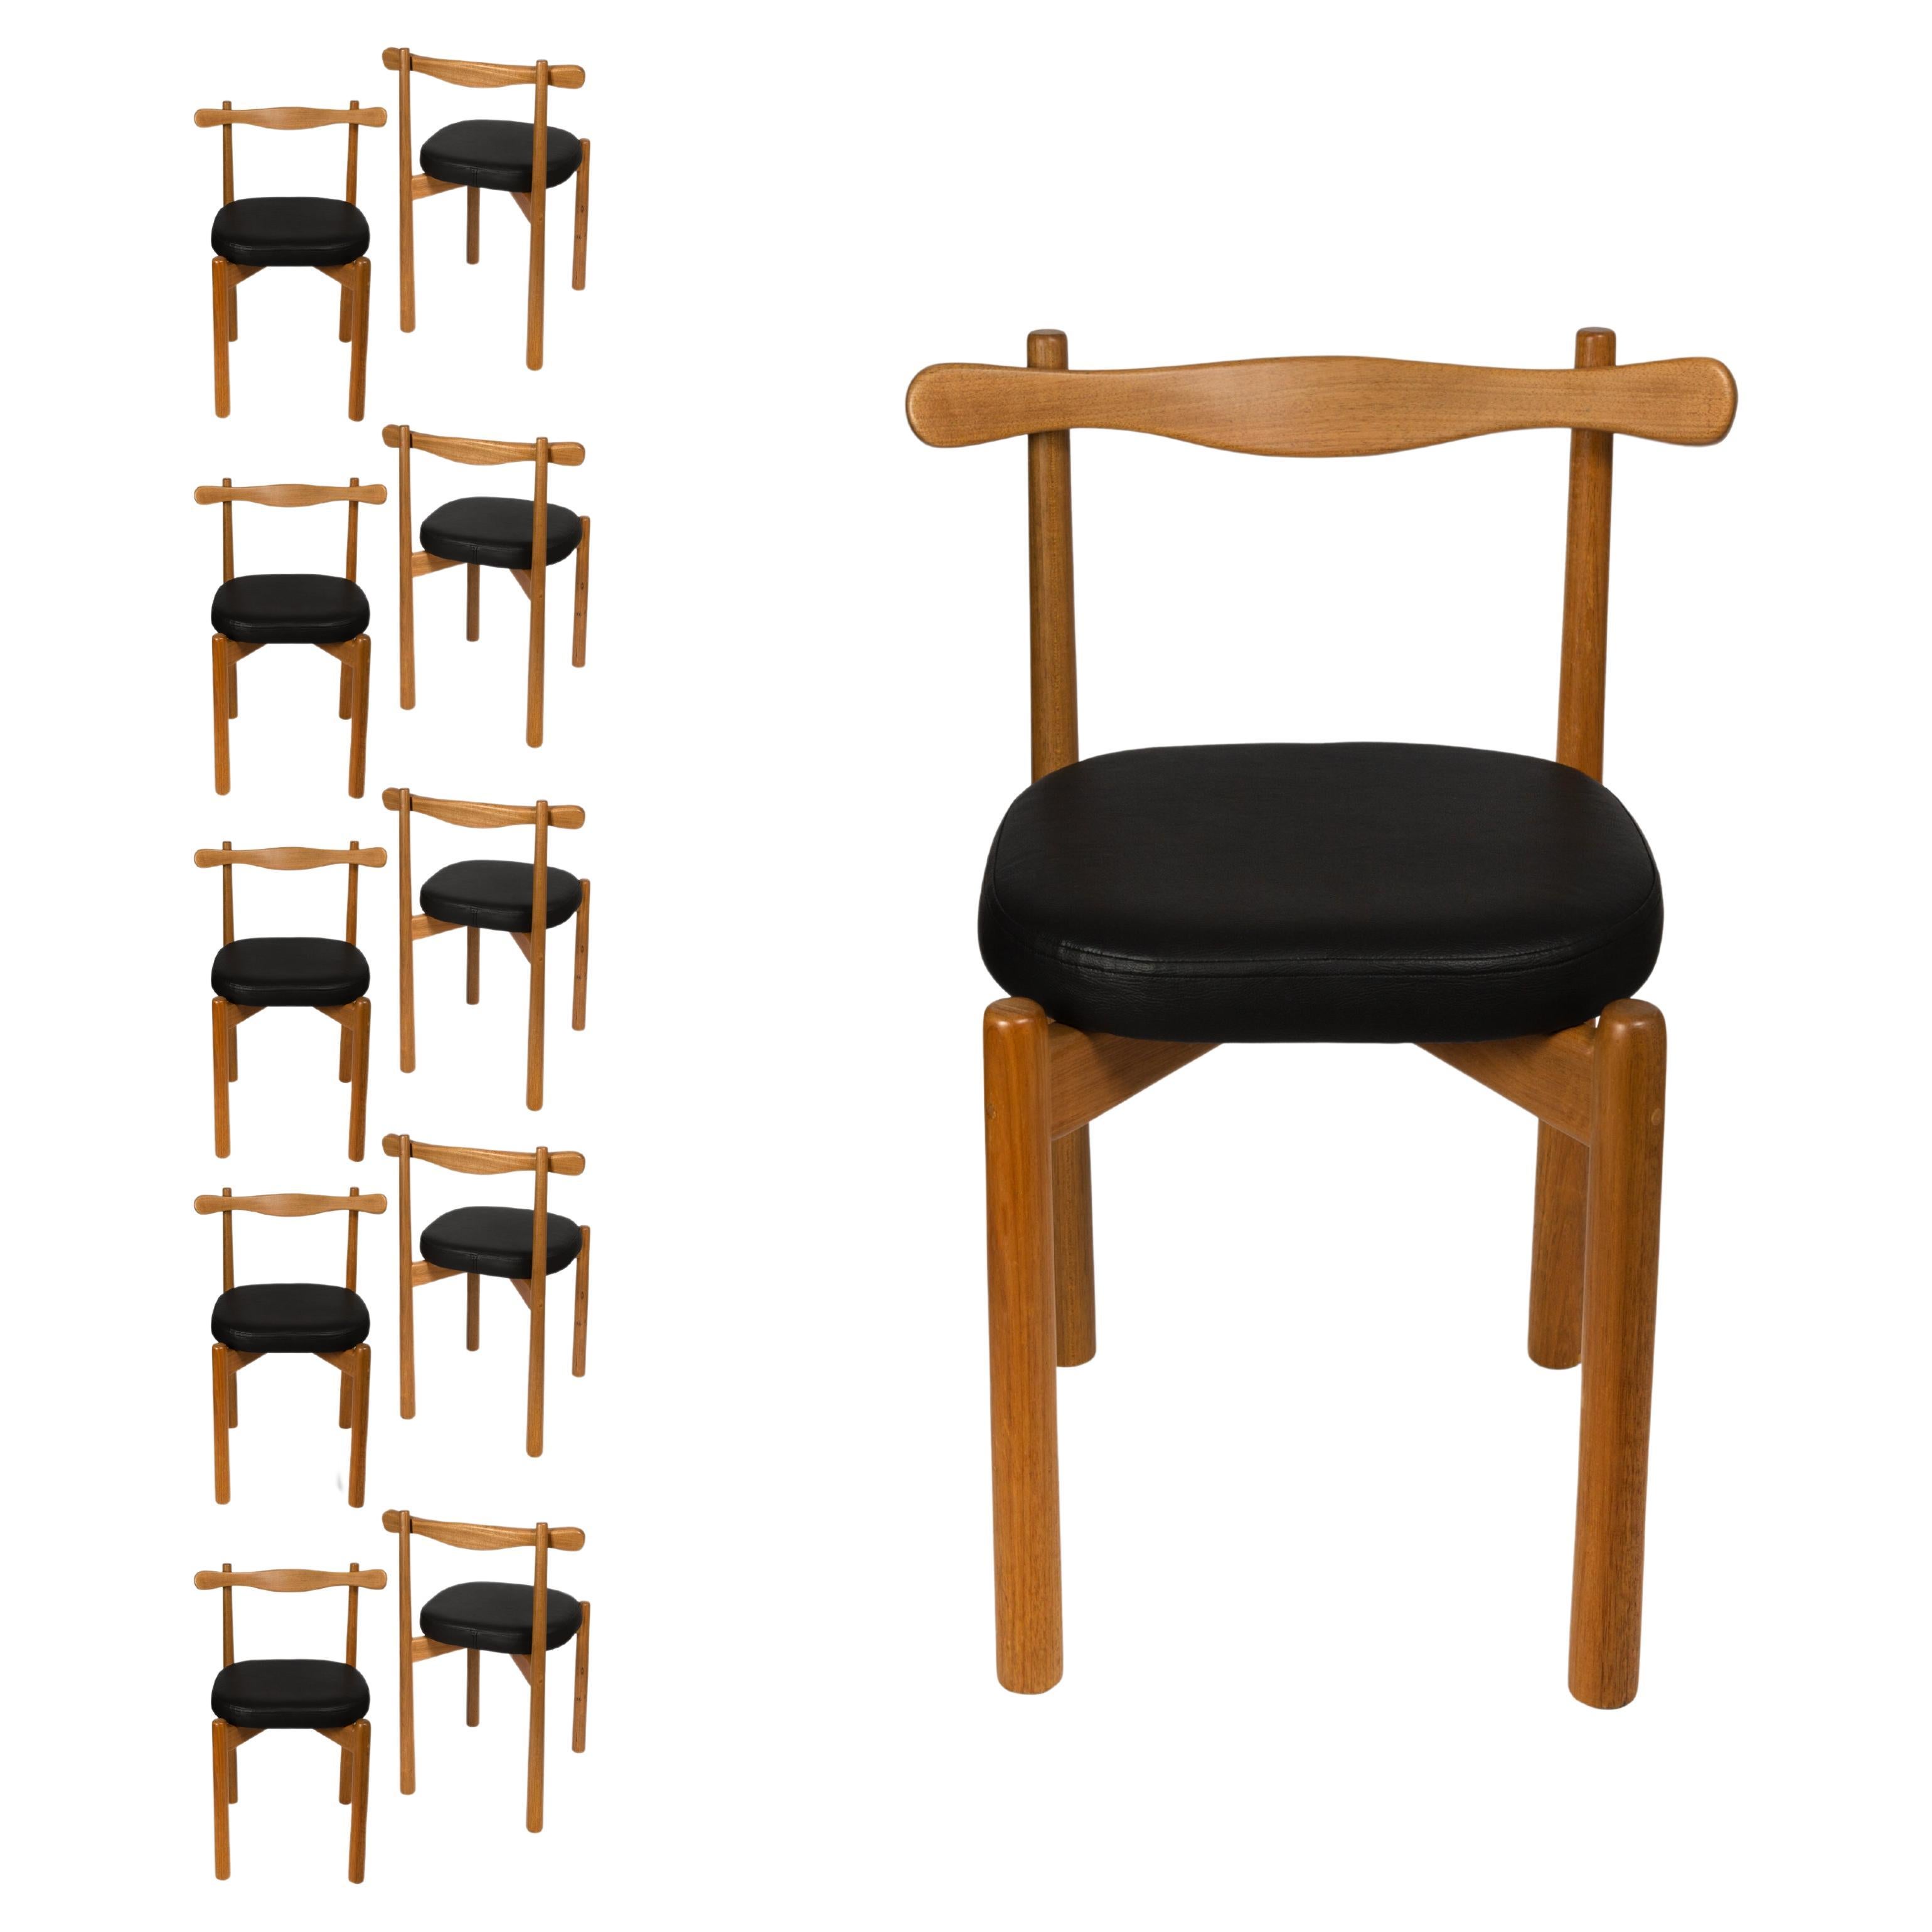 Set of 10 Dining Chairs Uçá Light Brown Wood (fabric ref : F07) For Sale